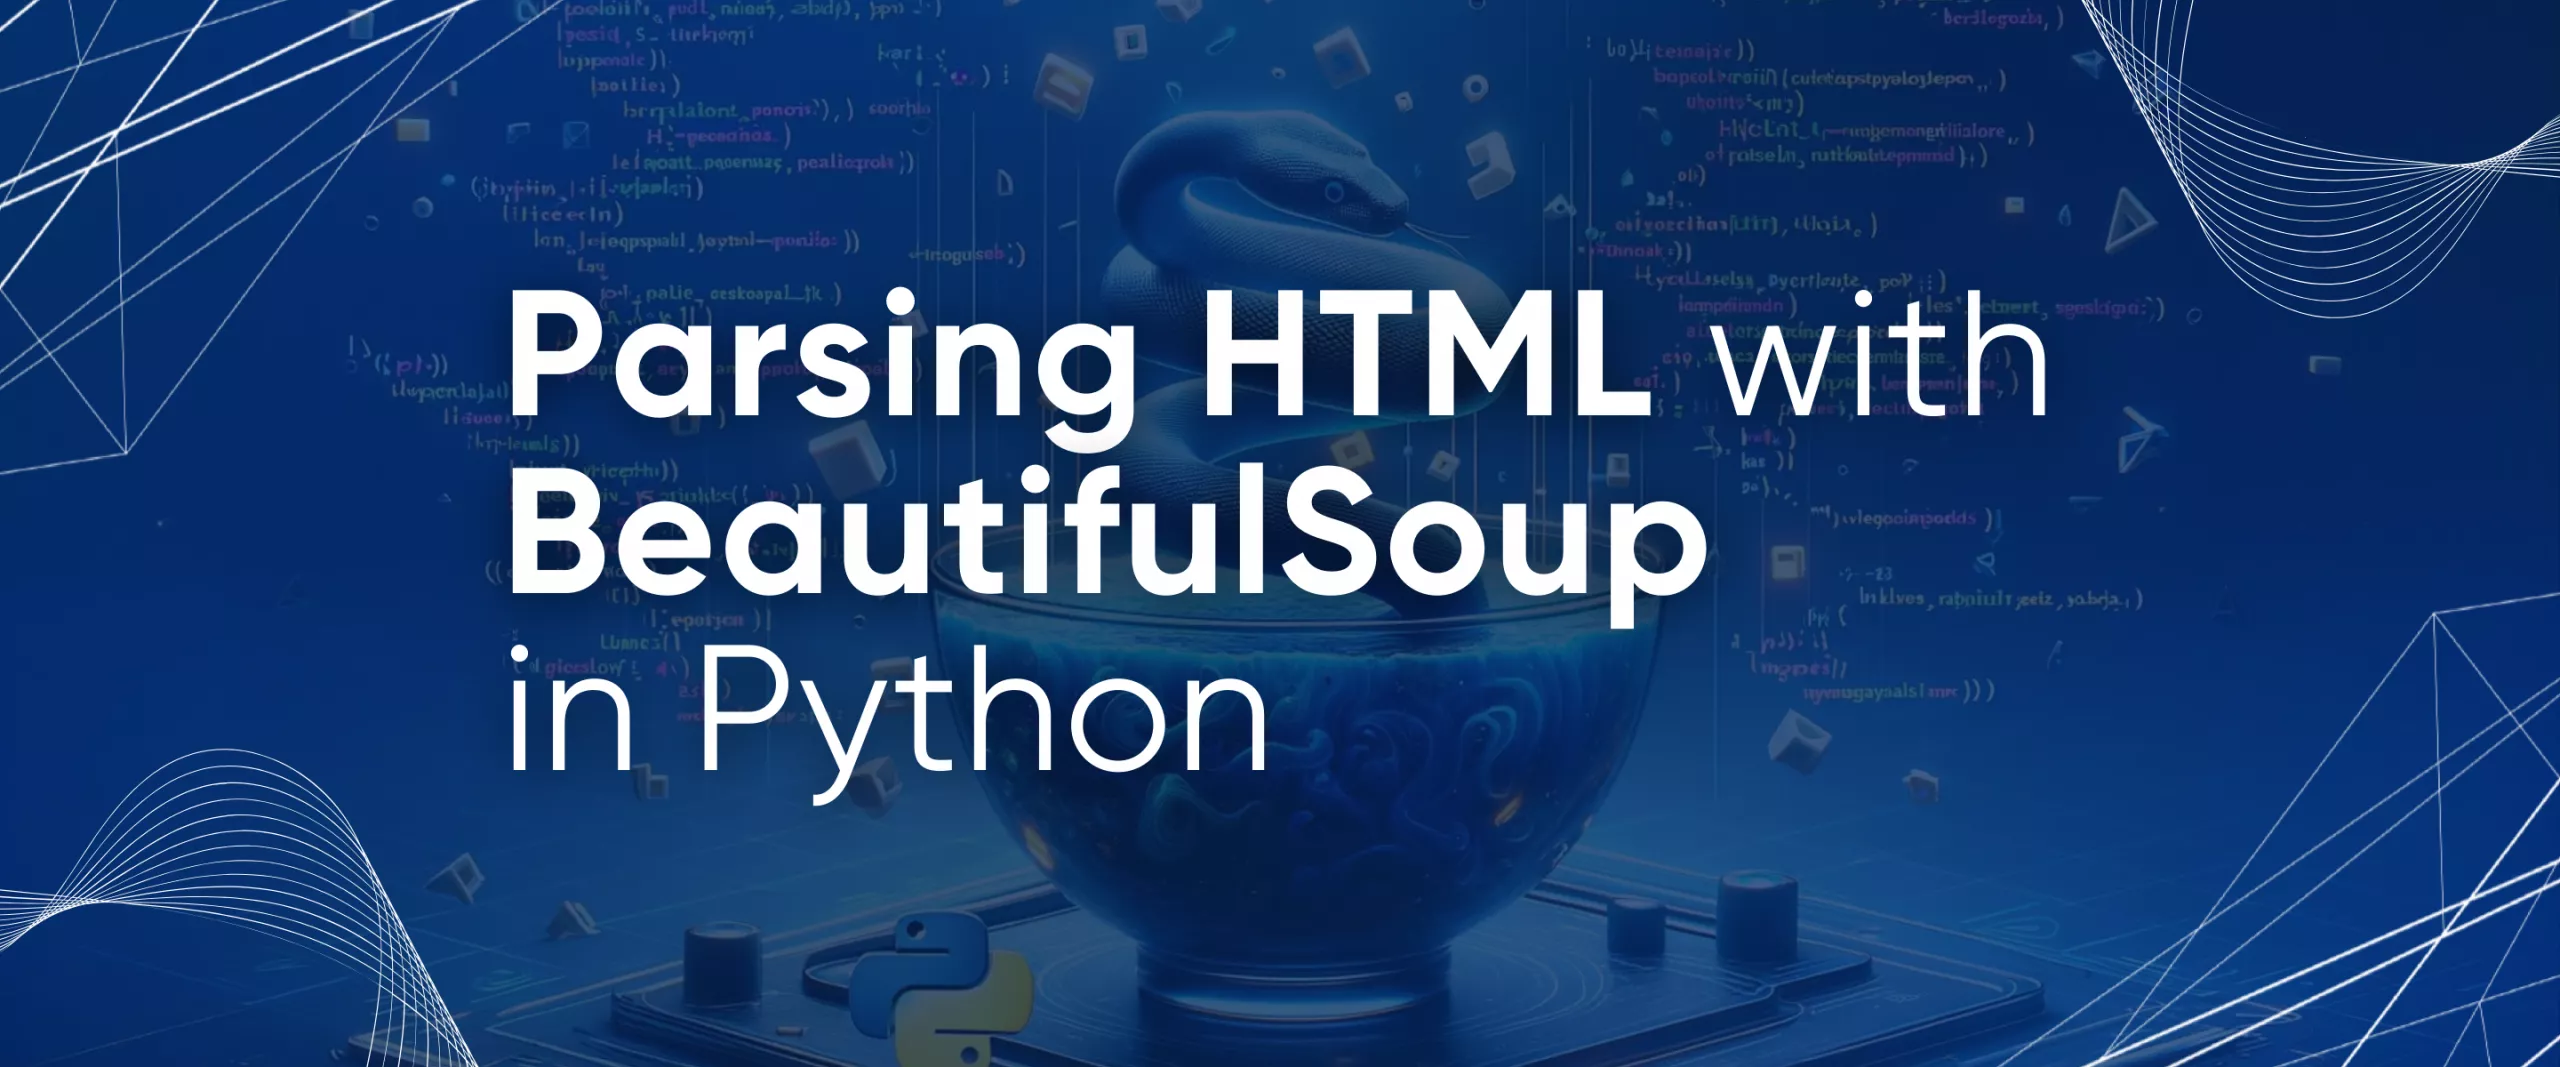 How to Use Beautiful Soup for Web Scraping